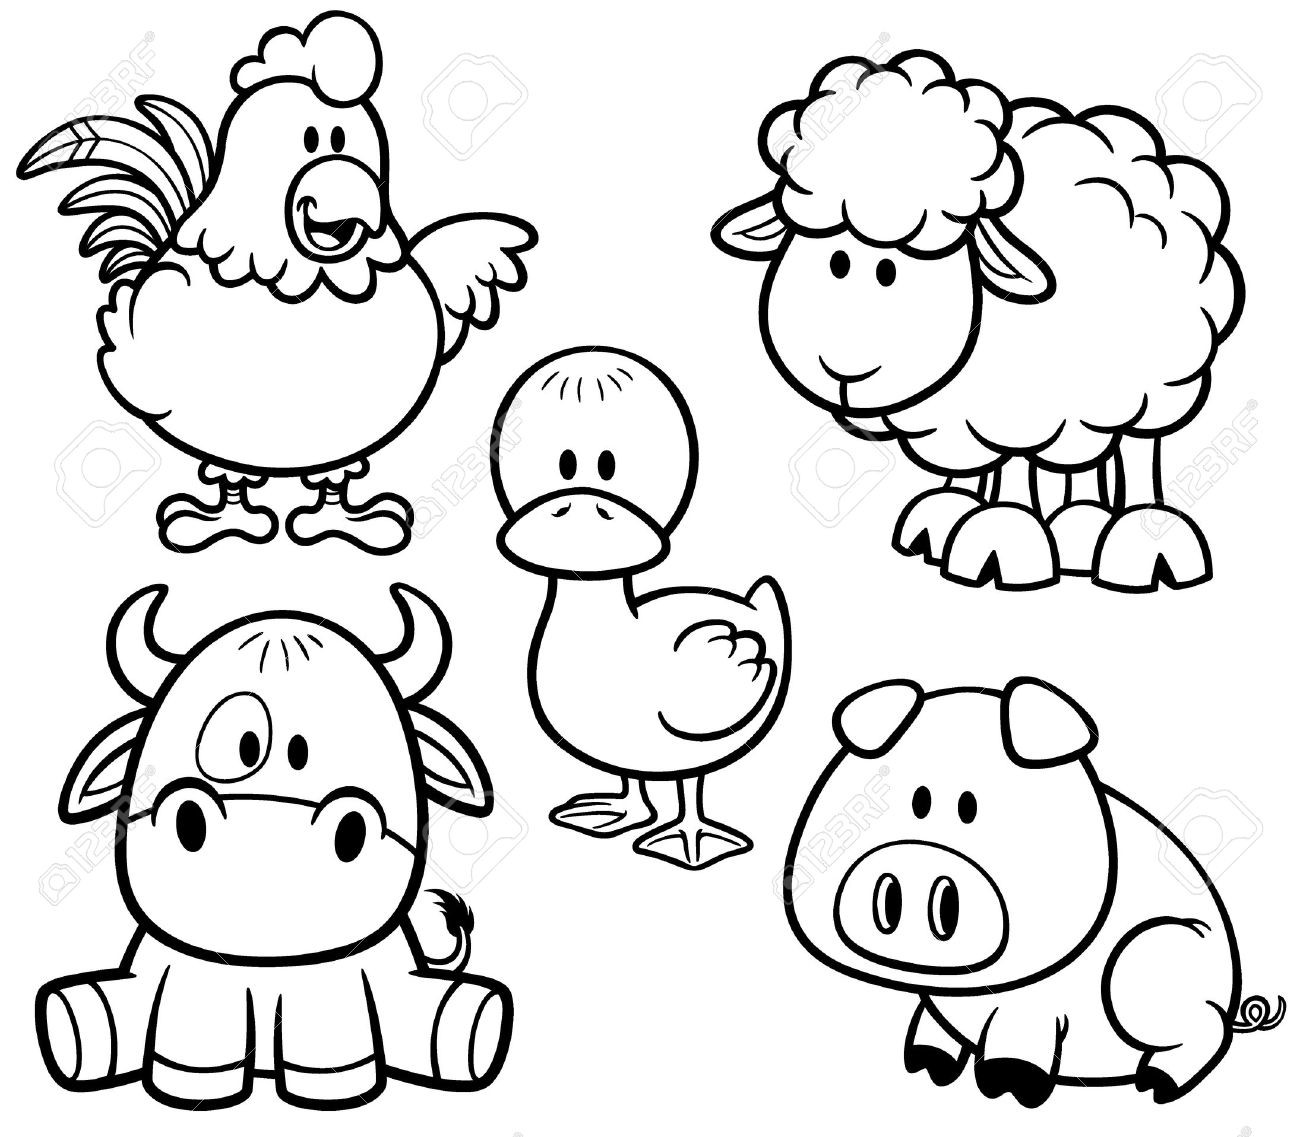 Baby Farm Animals Coloring Pages
 Cute Baby Farm Animal Coloring Pages Best Coloring Pages